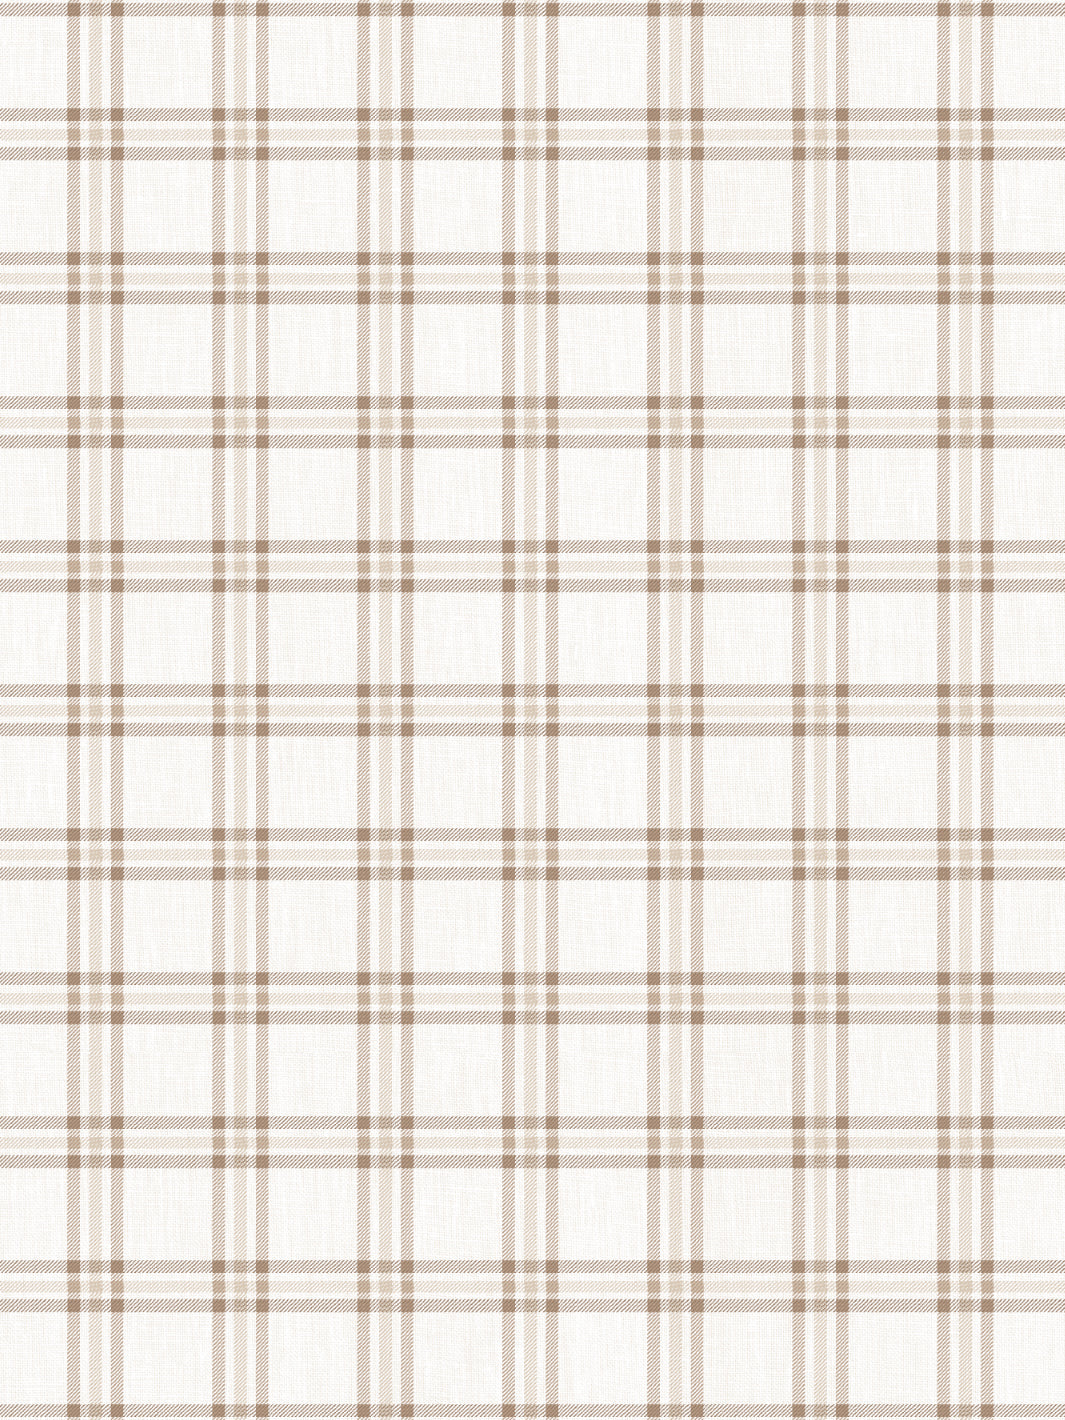 'Rogers Plaid' Linen Fabric by Nathan Turner - Neutral